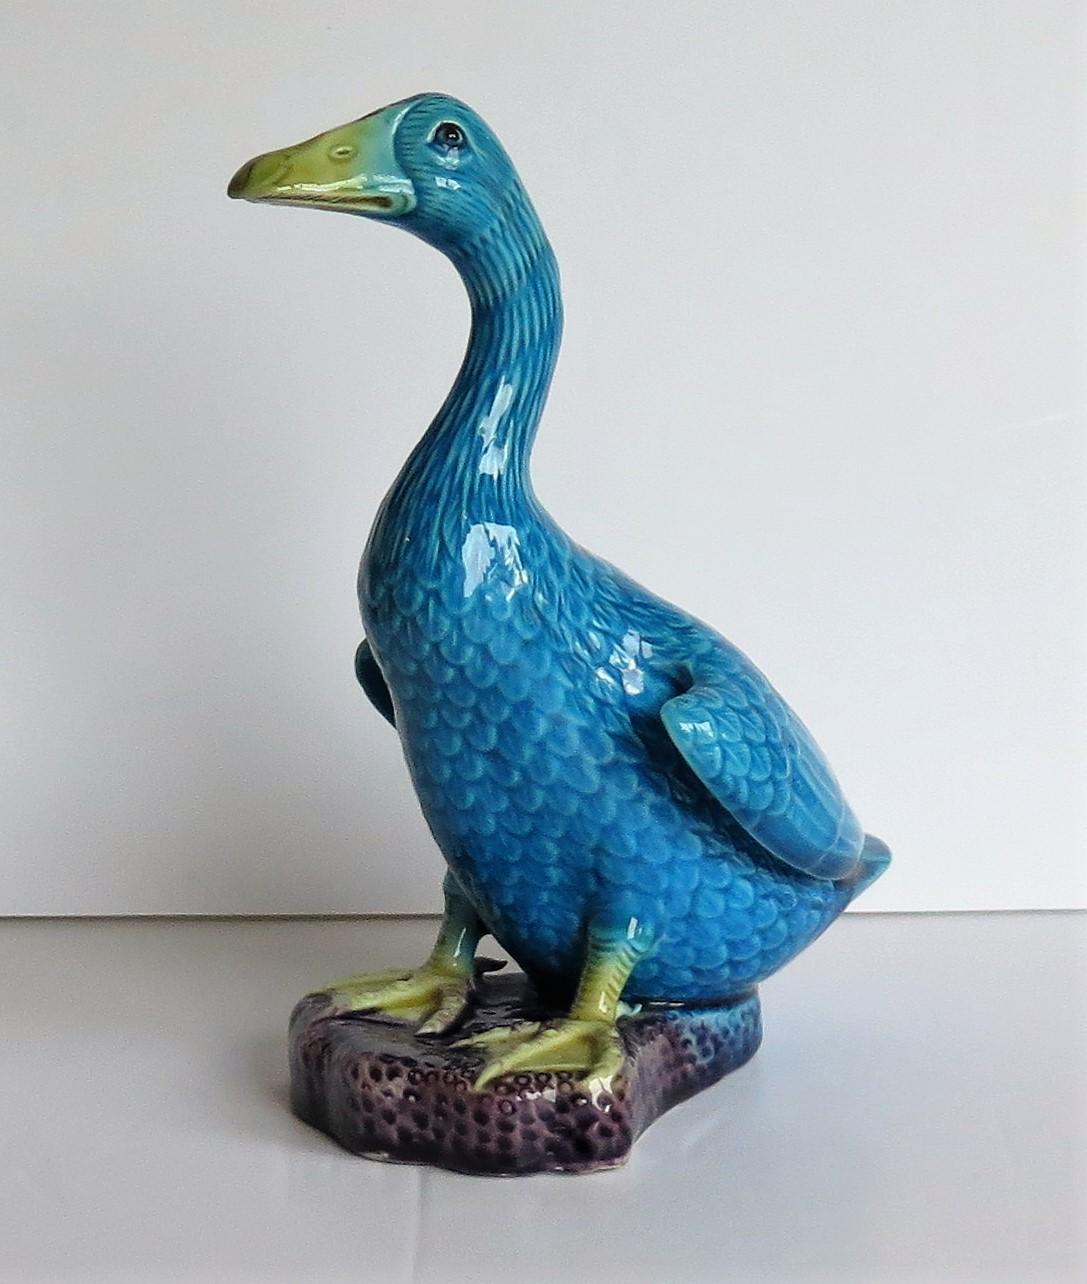 This is a good Chinese Export porcelain Goose Bird decorated in polychrome enamels and dating to the 1930s.

The bird figurine is well modelled and very life like, with the goose standing upright on a rocky base. The porcelain is decorated in bold